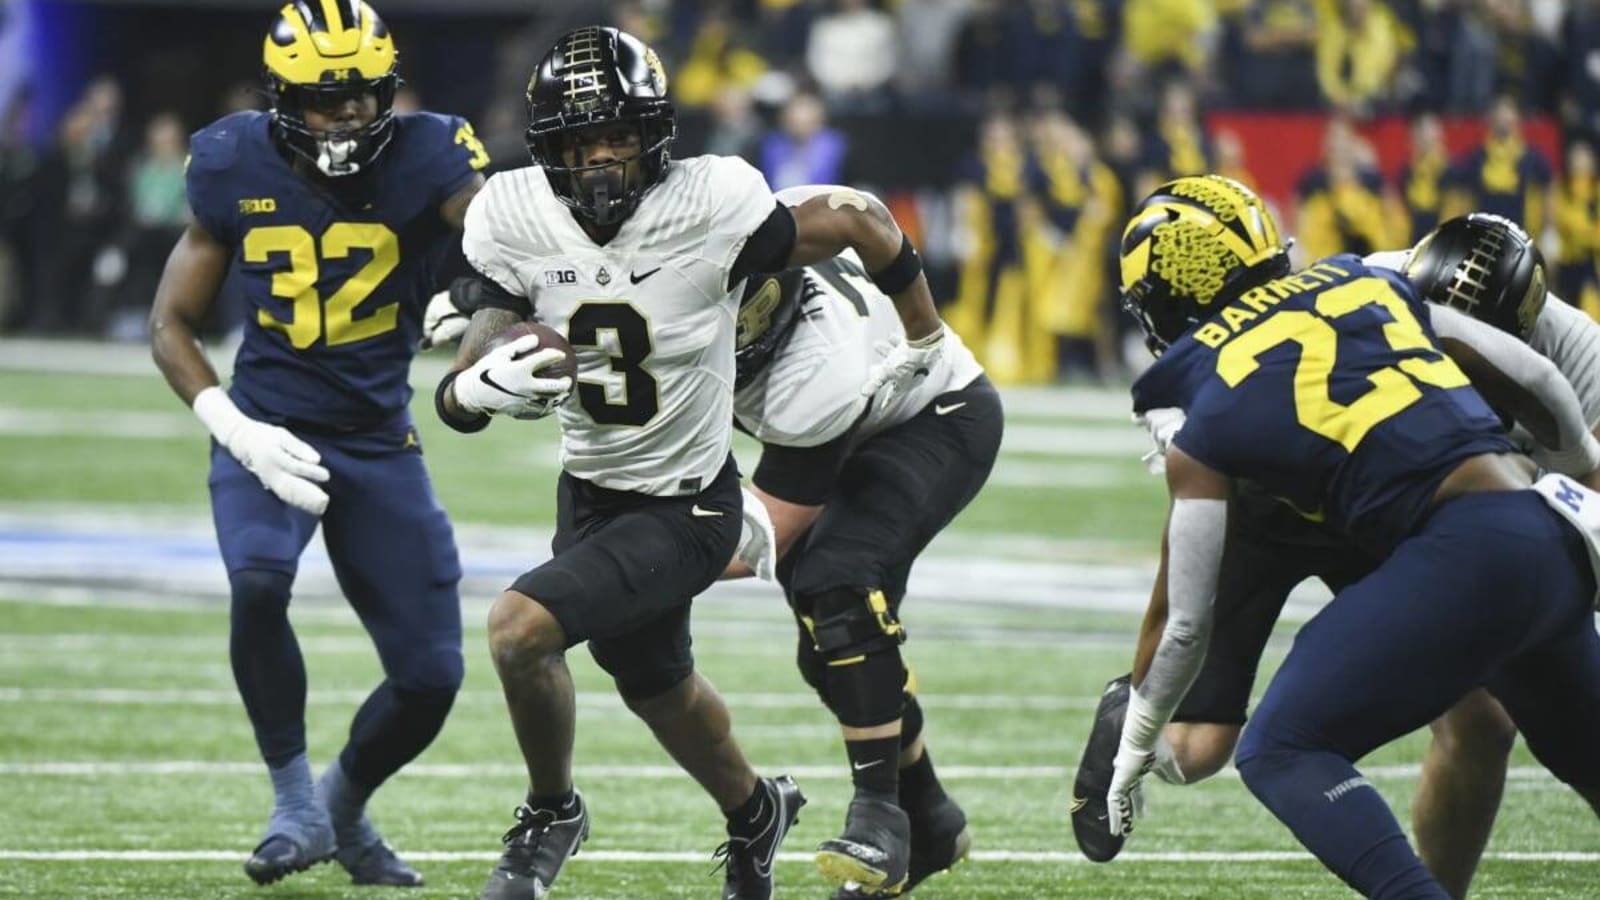 Tyrone Tracy Jr. to Play Running Back for Purdue Football This Spring